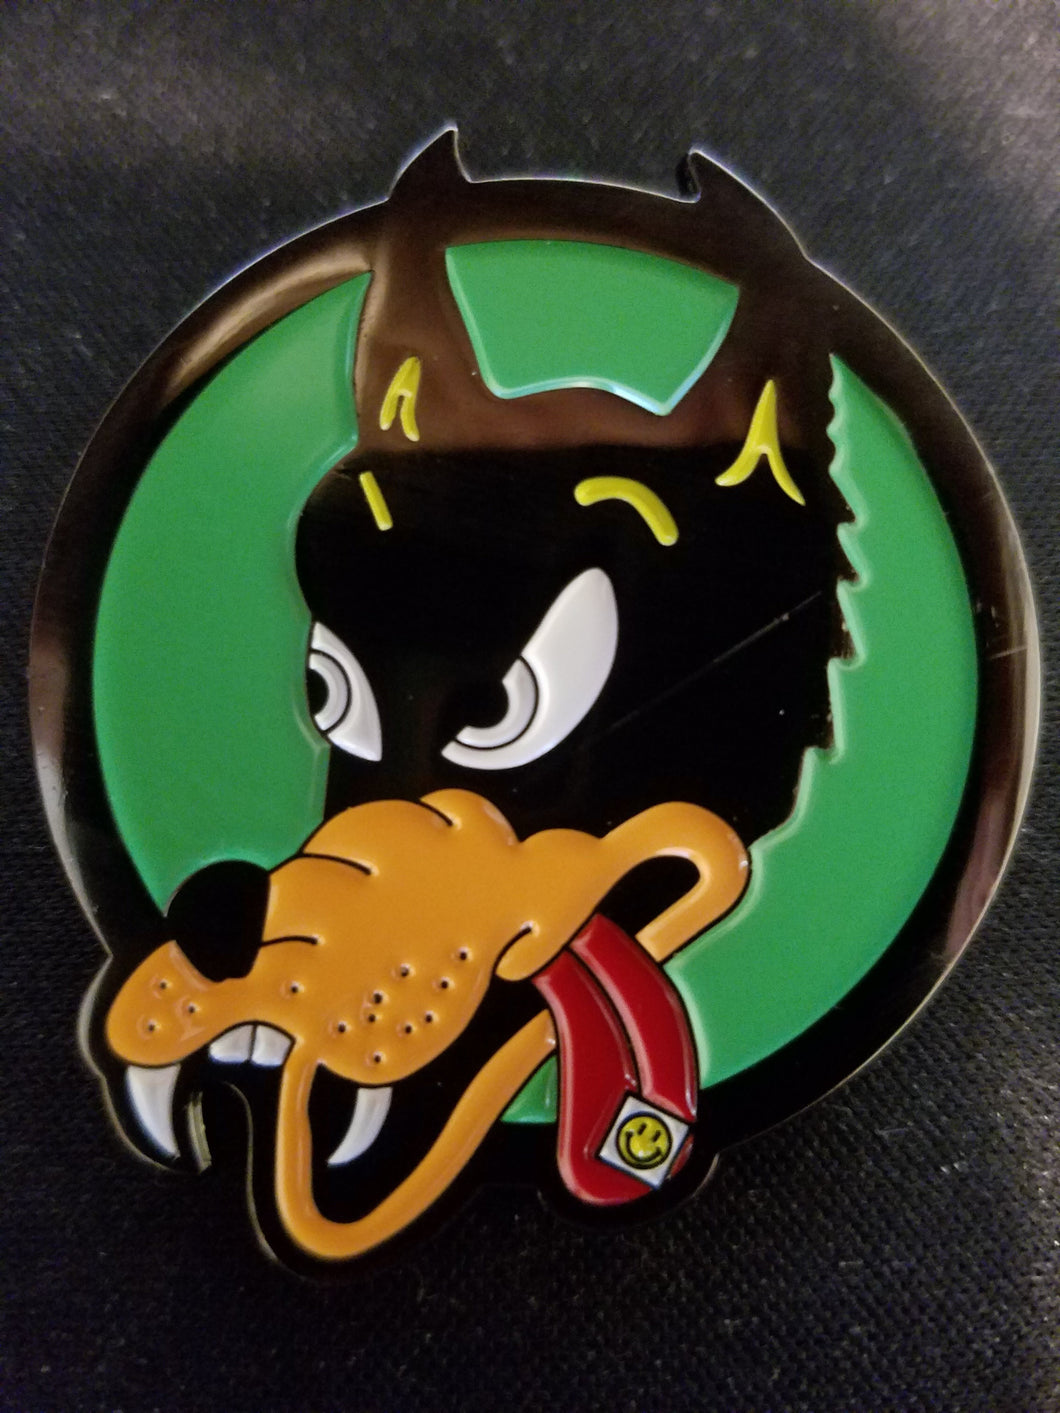 Dire Wolf Hat Pin Psychedelic